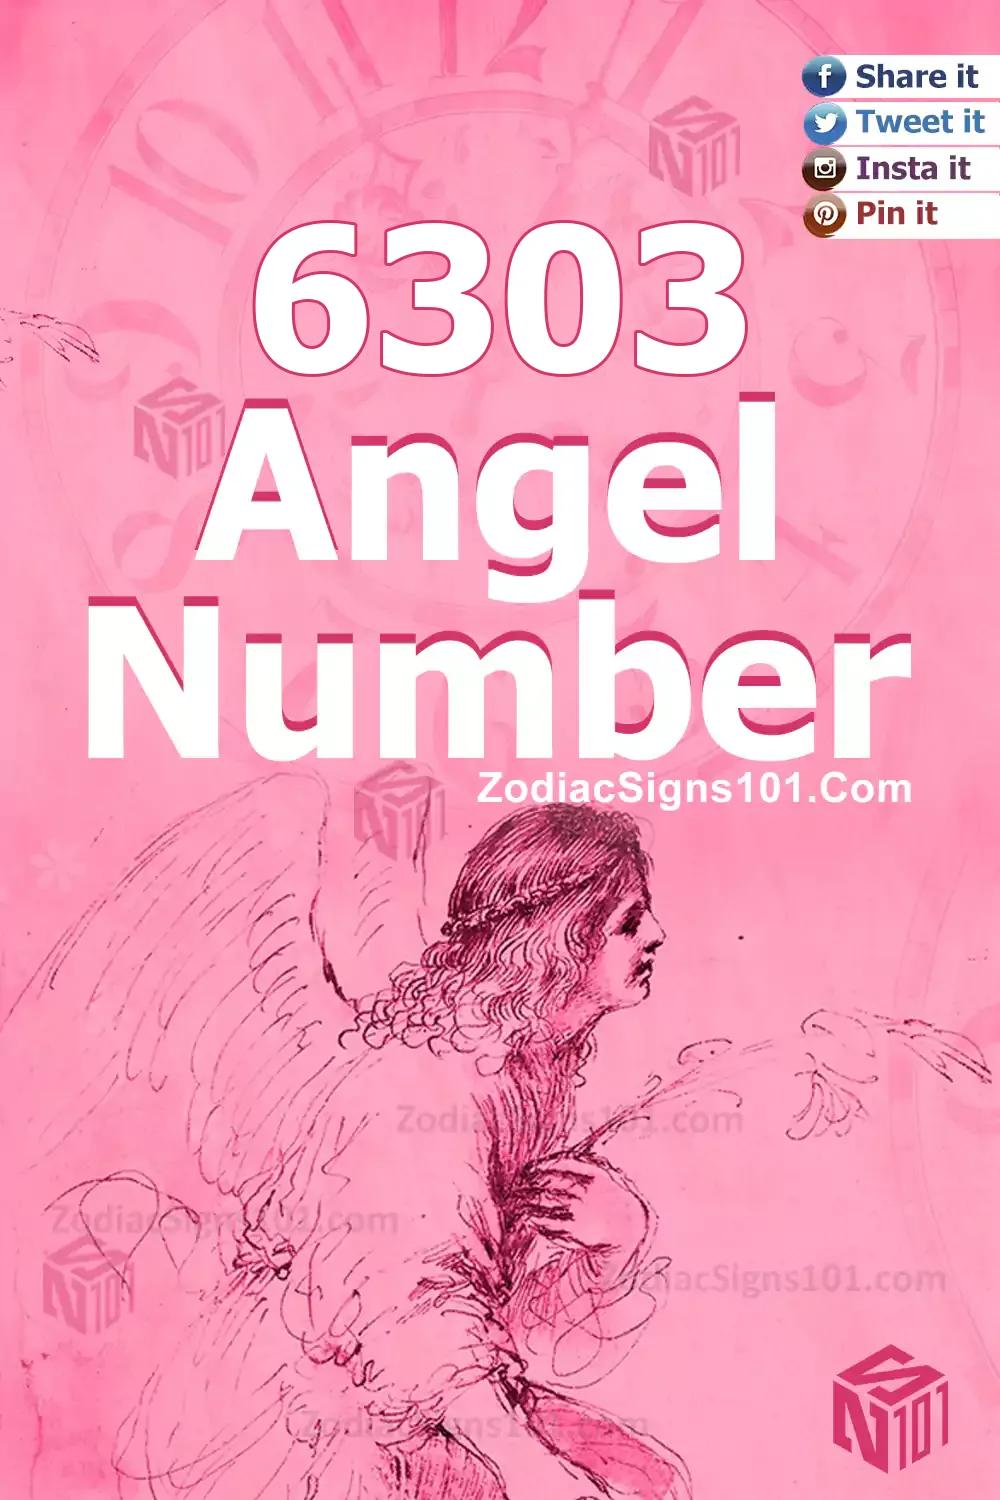 6303 Angel Number Meaning